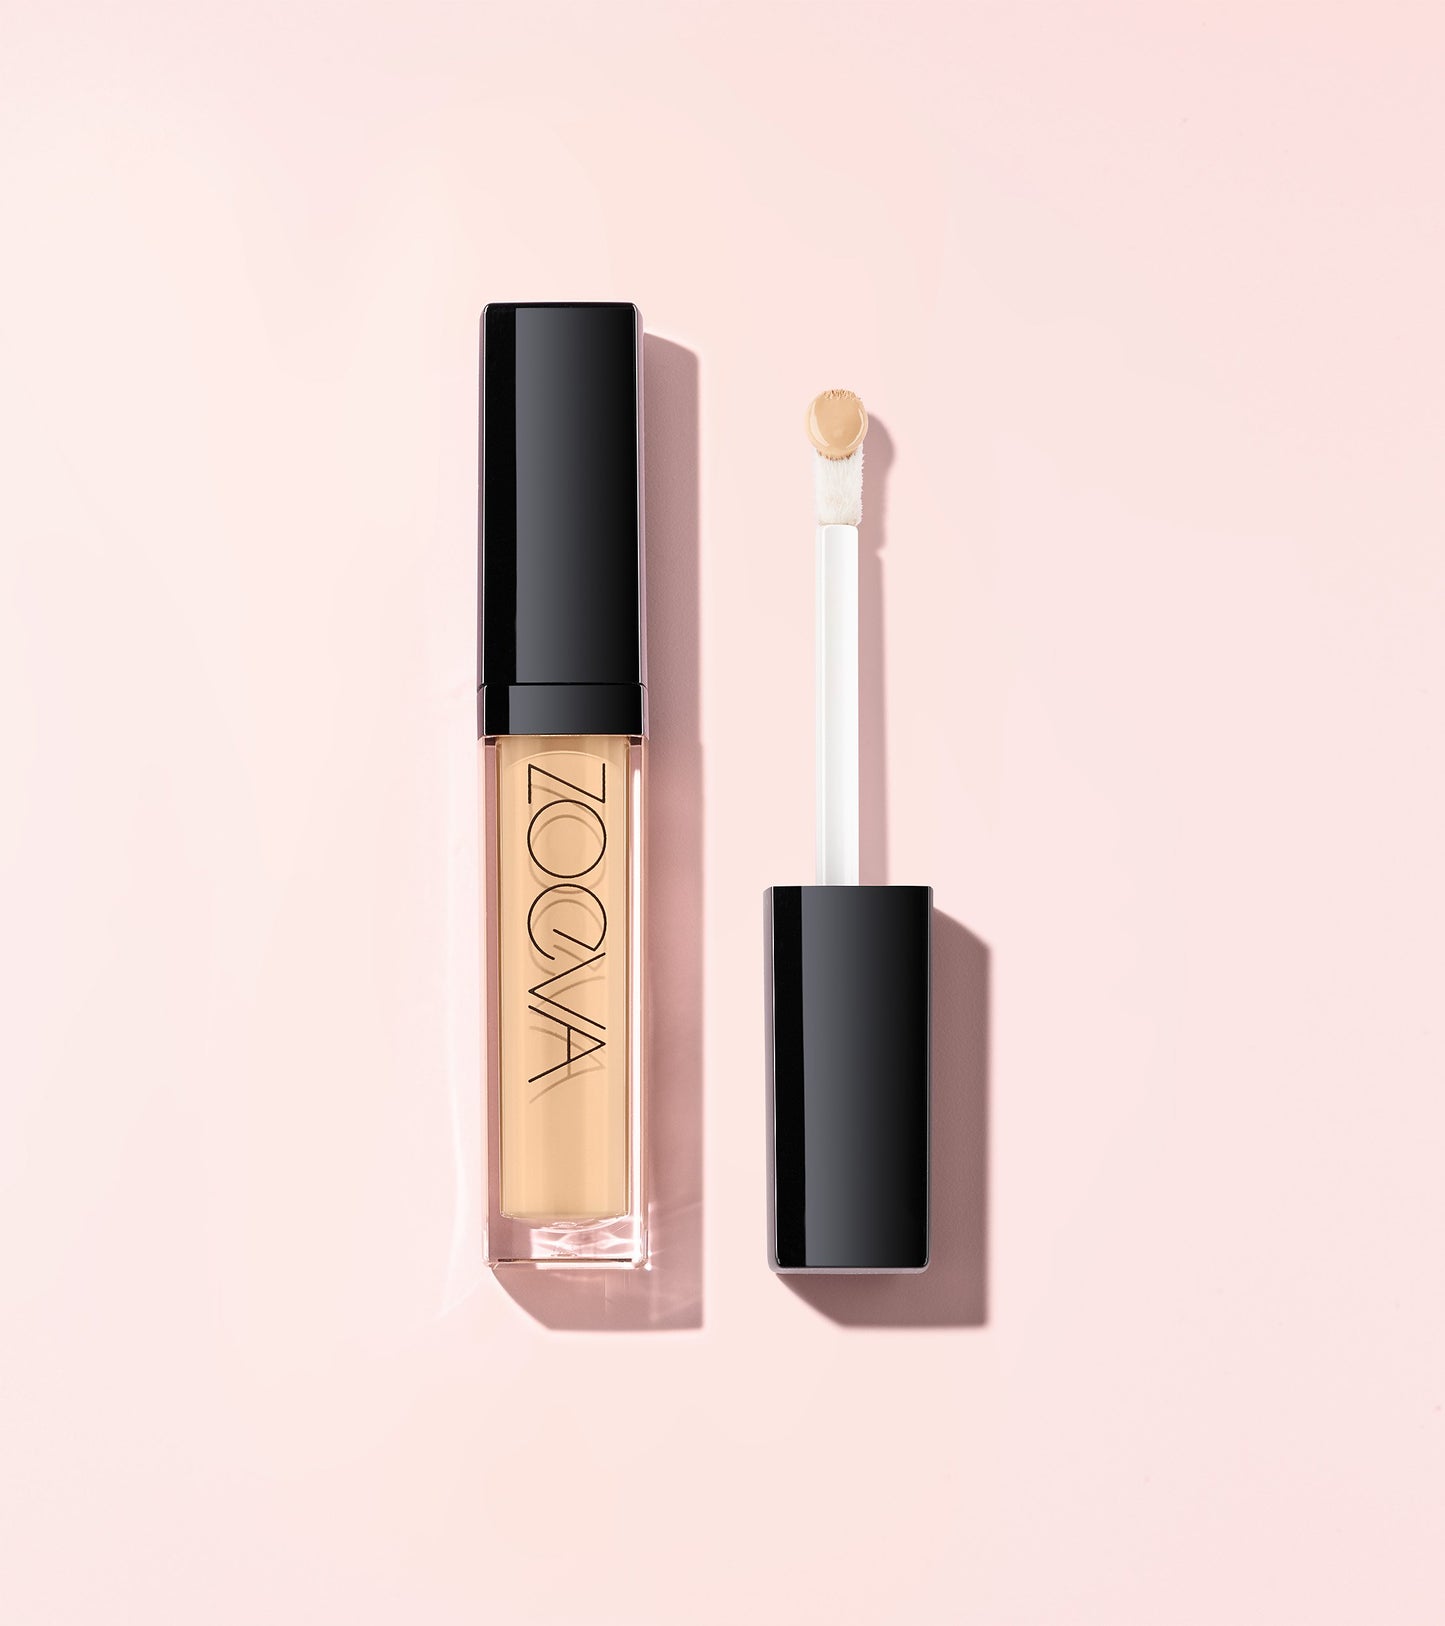 AUTHENTIK SKIN PERFECTOR CONCEALER (190 POSITIVE) Expanded Image 1